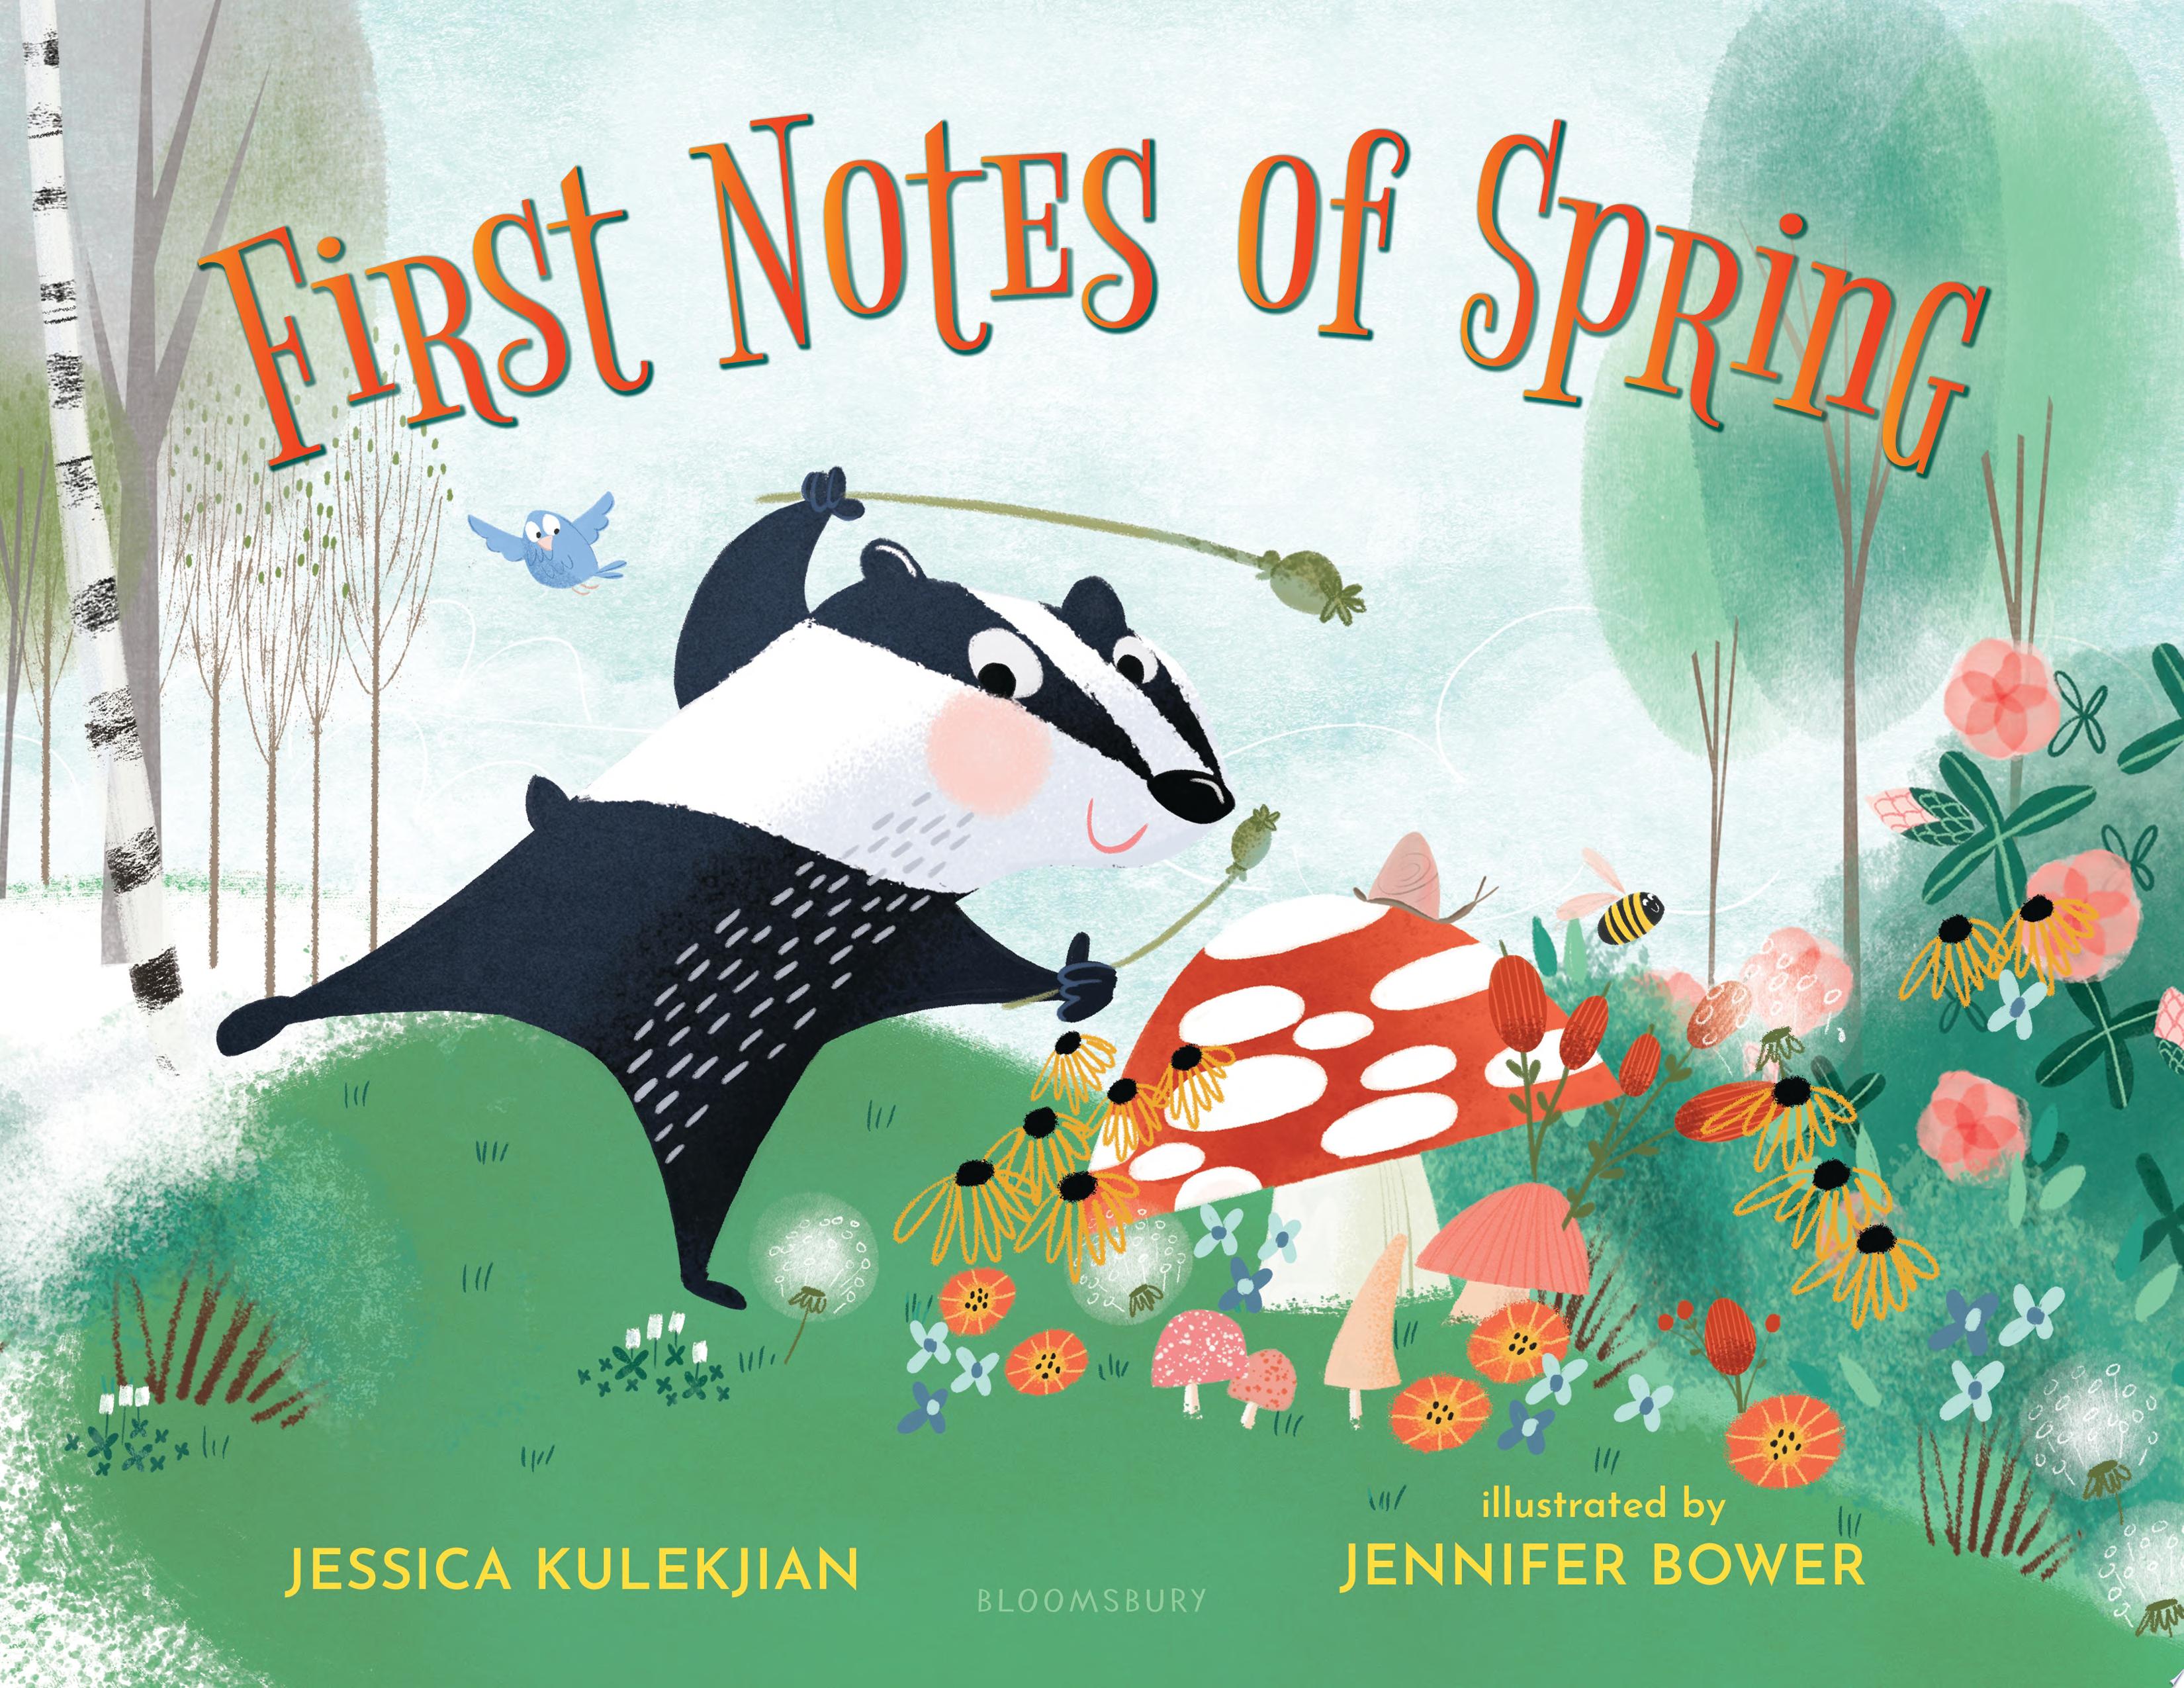 Image for "First Notes of Spring"